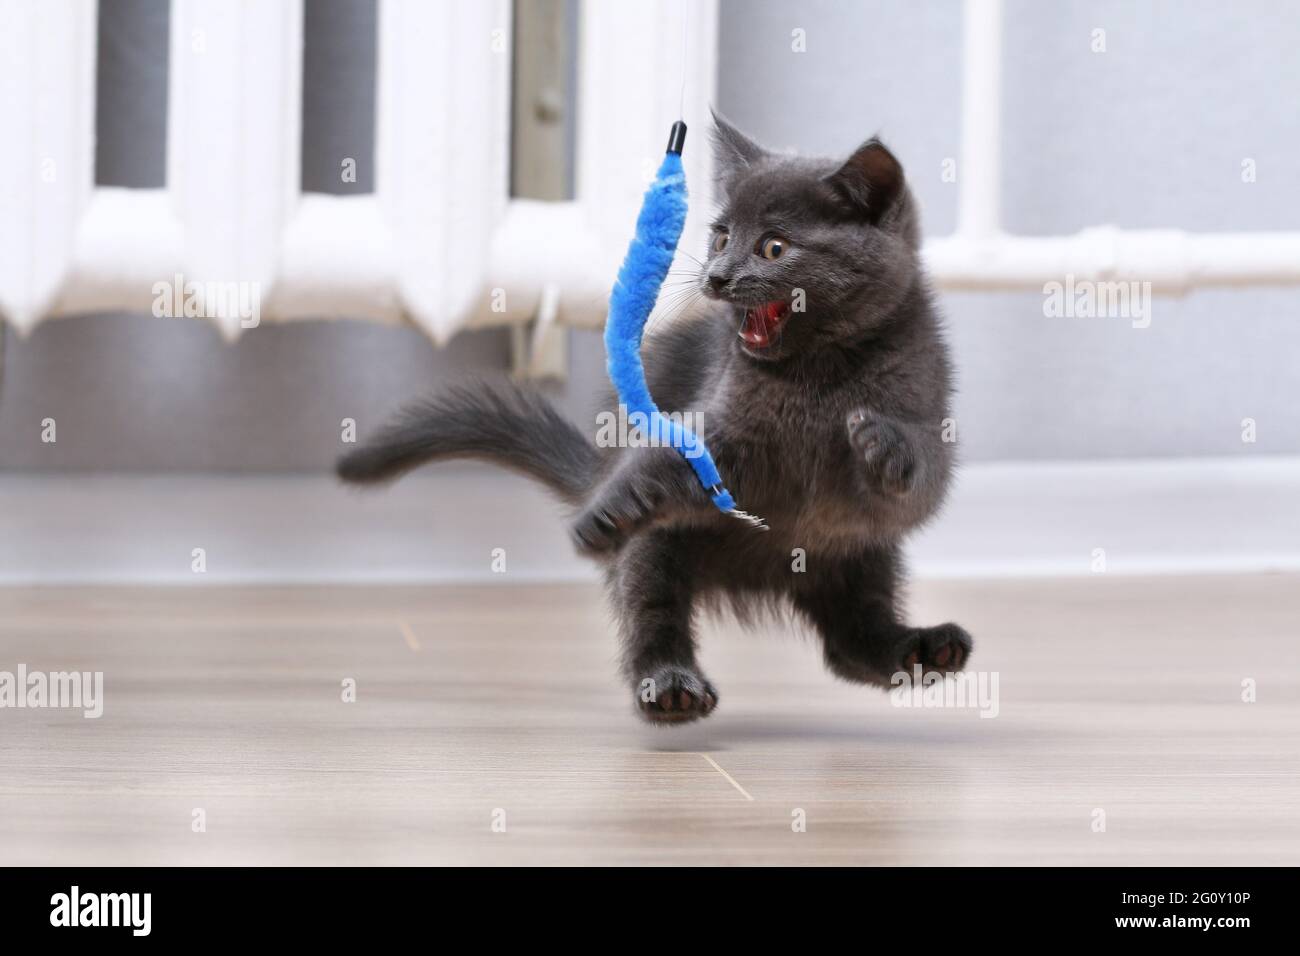 A small gray kitten plays with a toy on a fishing rod. Cat toys